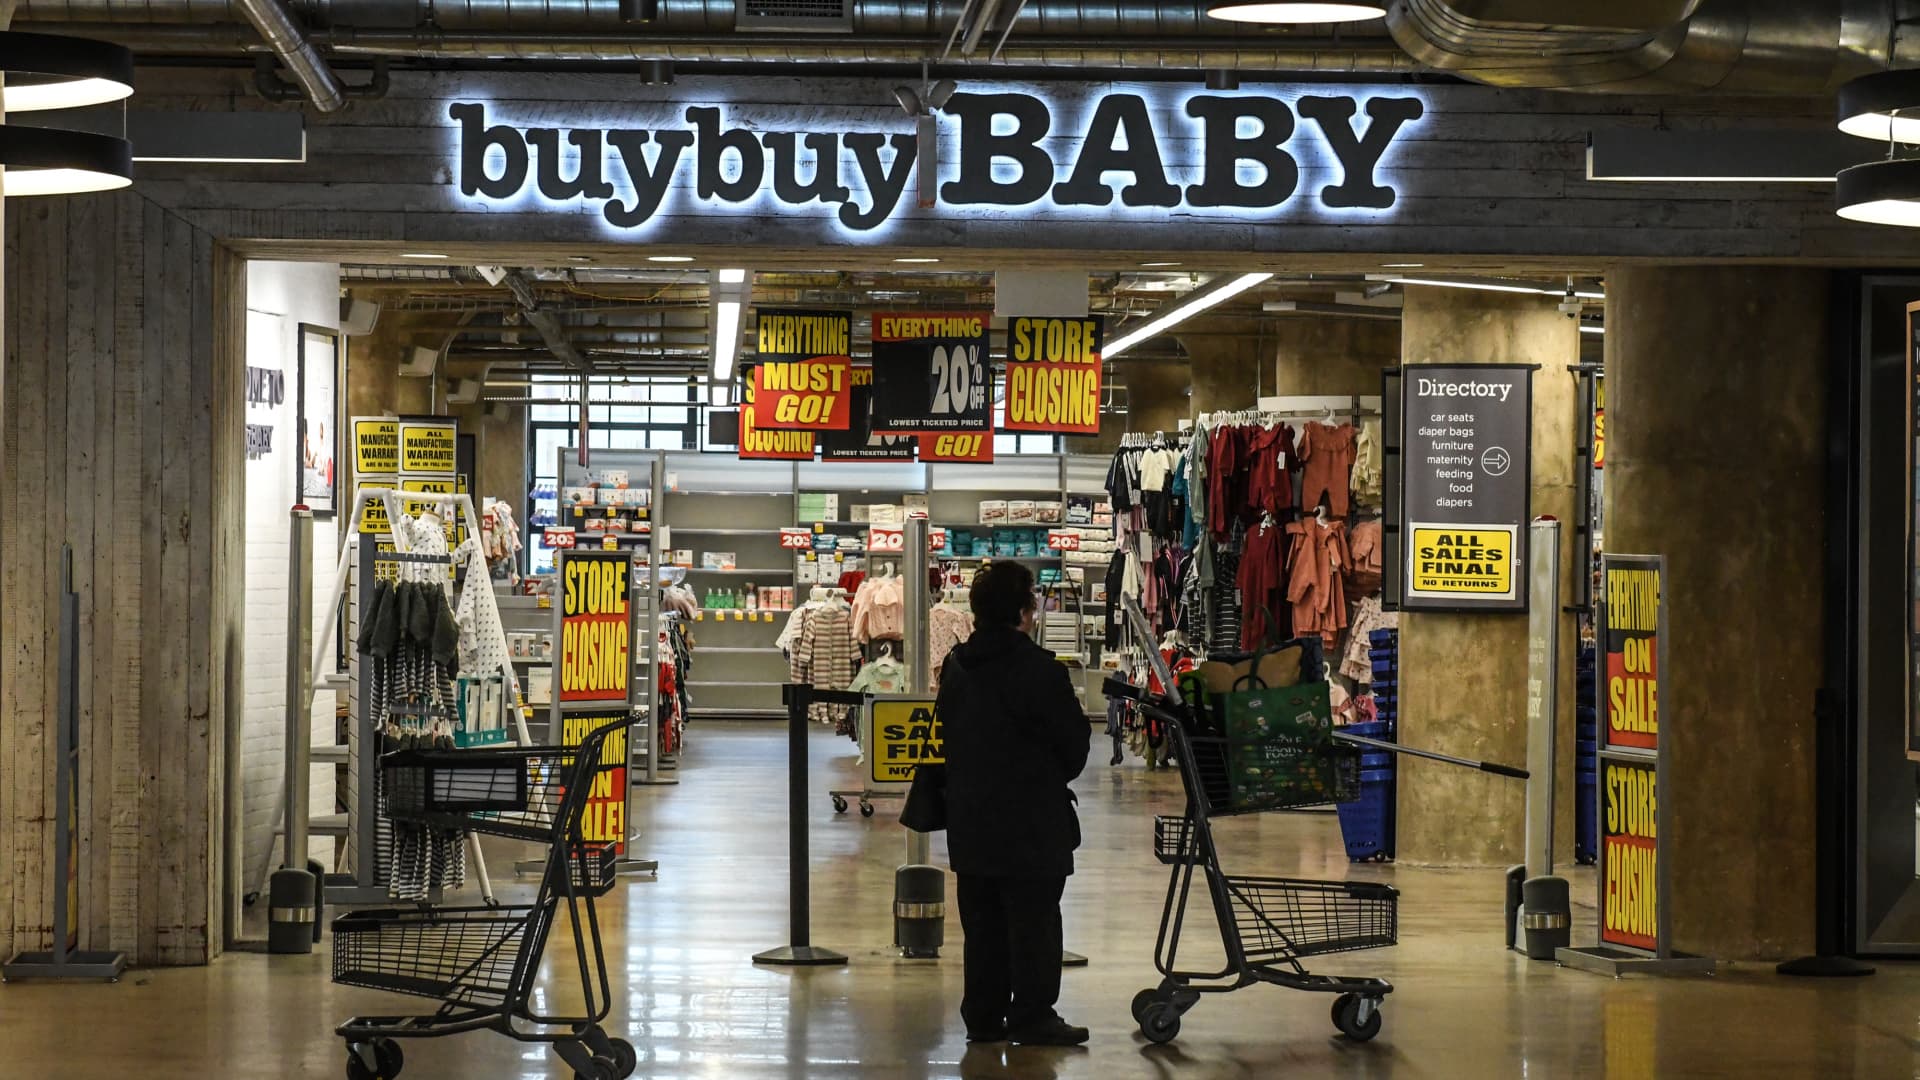 Buy Buy Baby auction is canceled, but buyers are still interested in making a bid